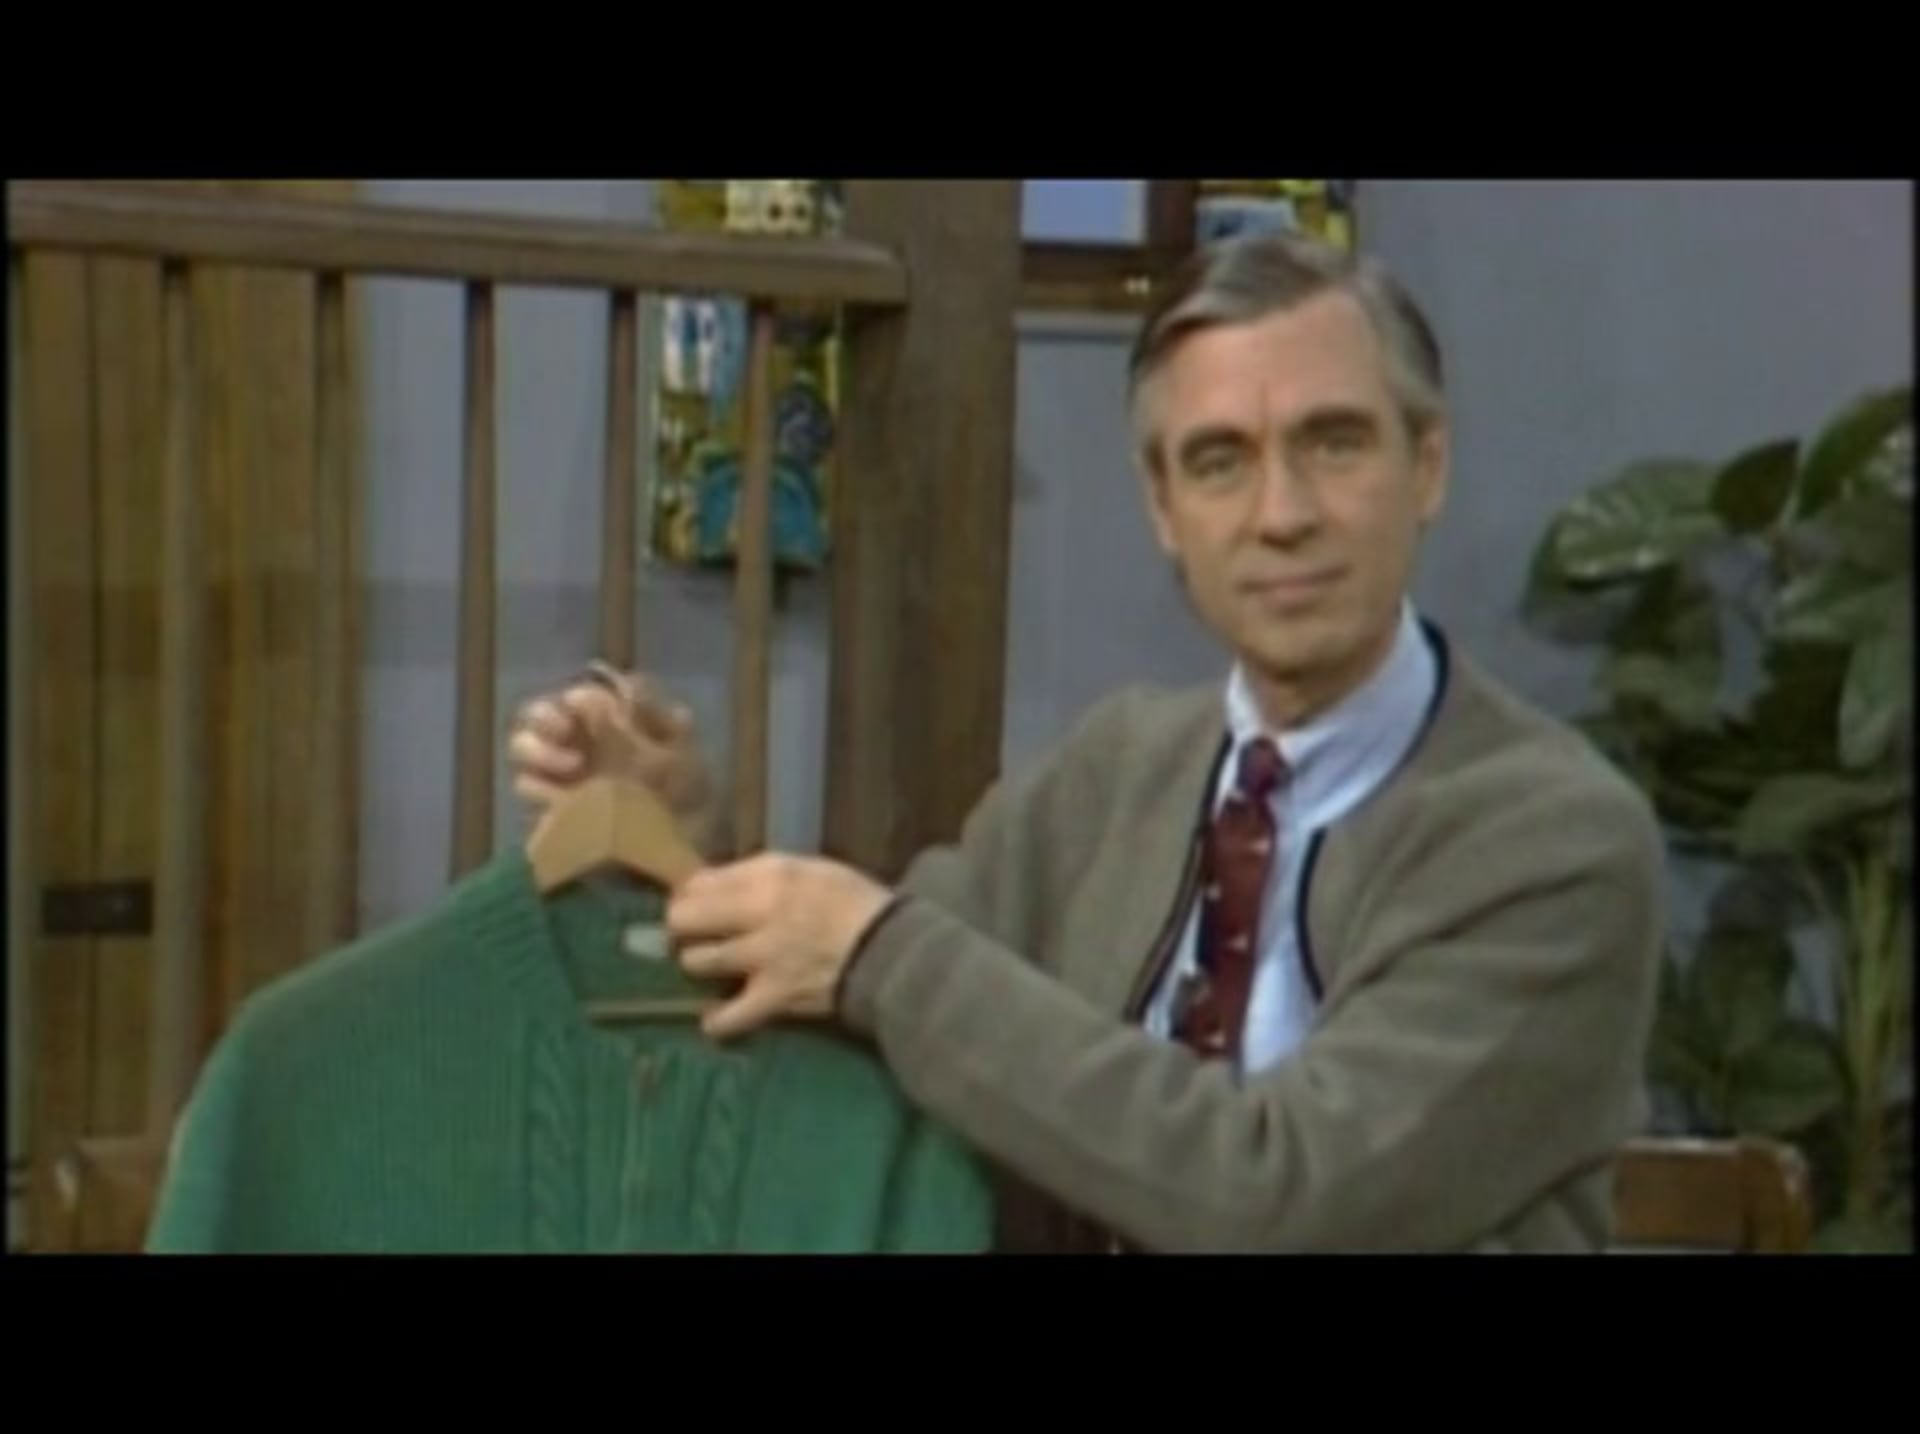 Professional Development Newsletter: Mister Rogers Sweater (Commentary by Hedda Sharapan)